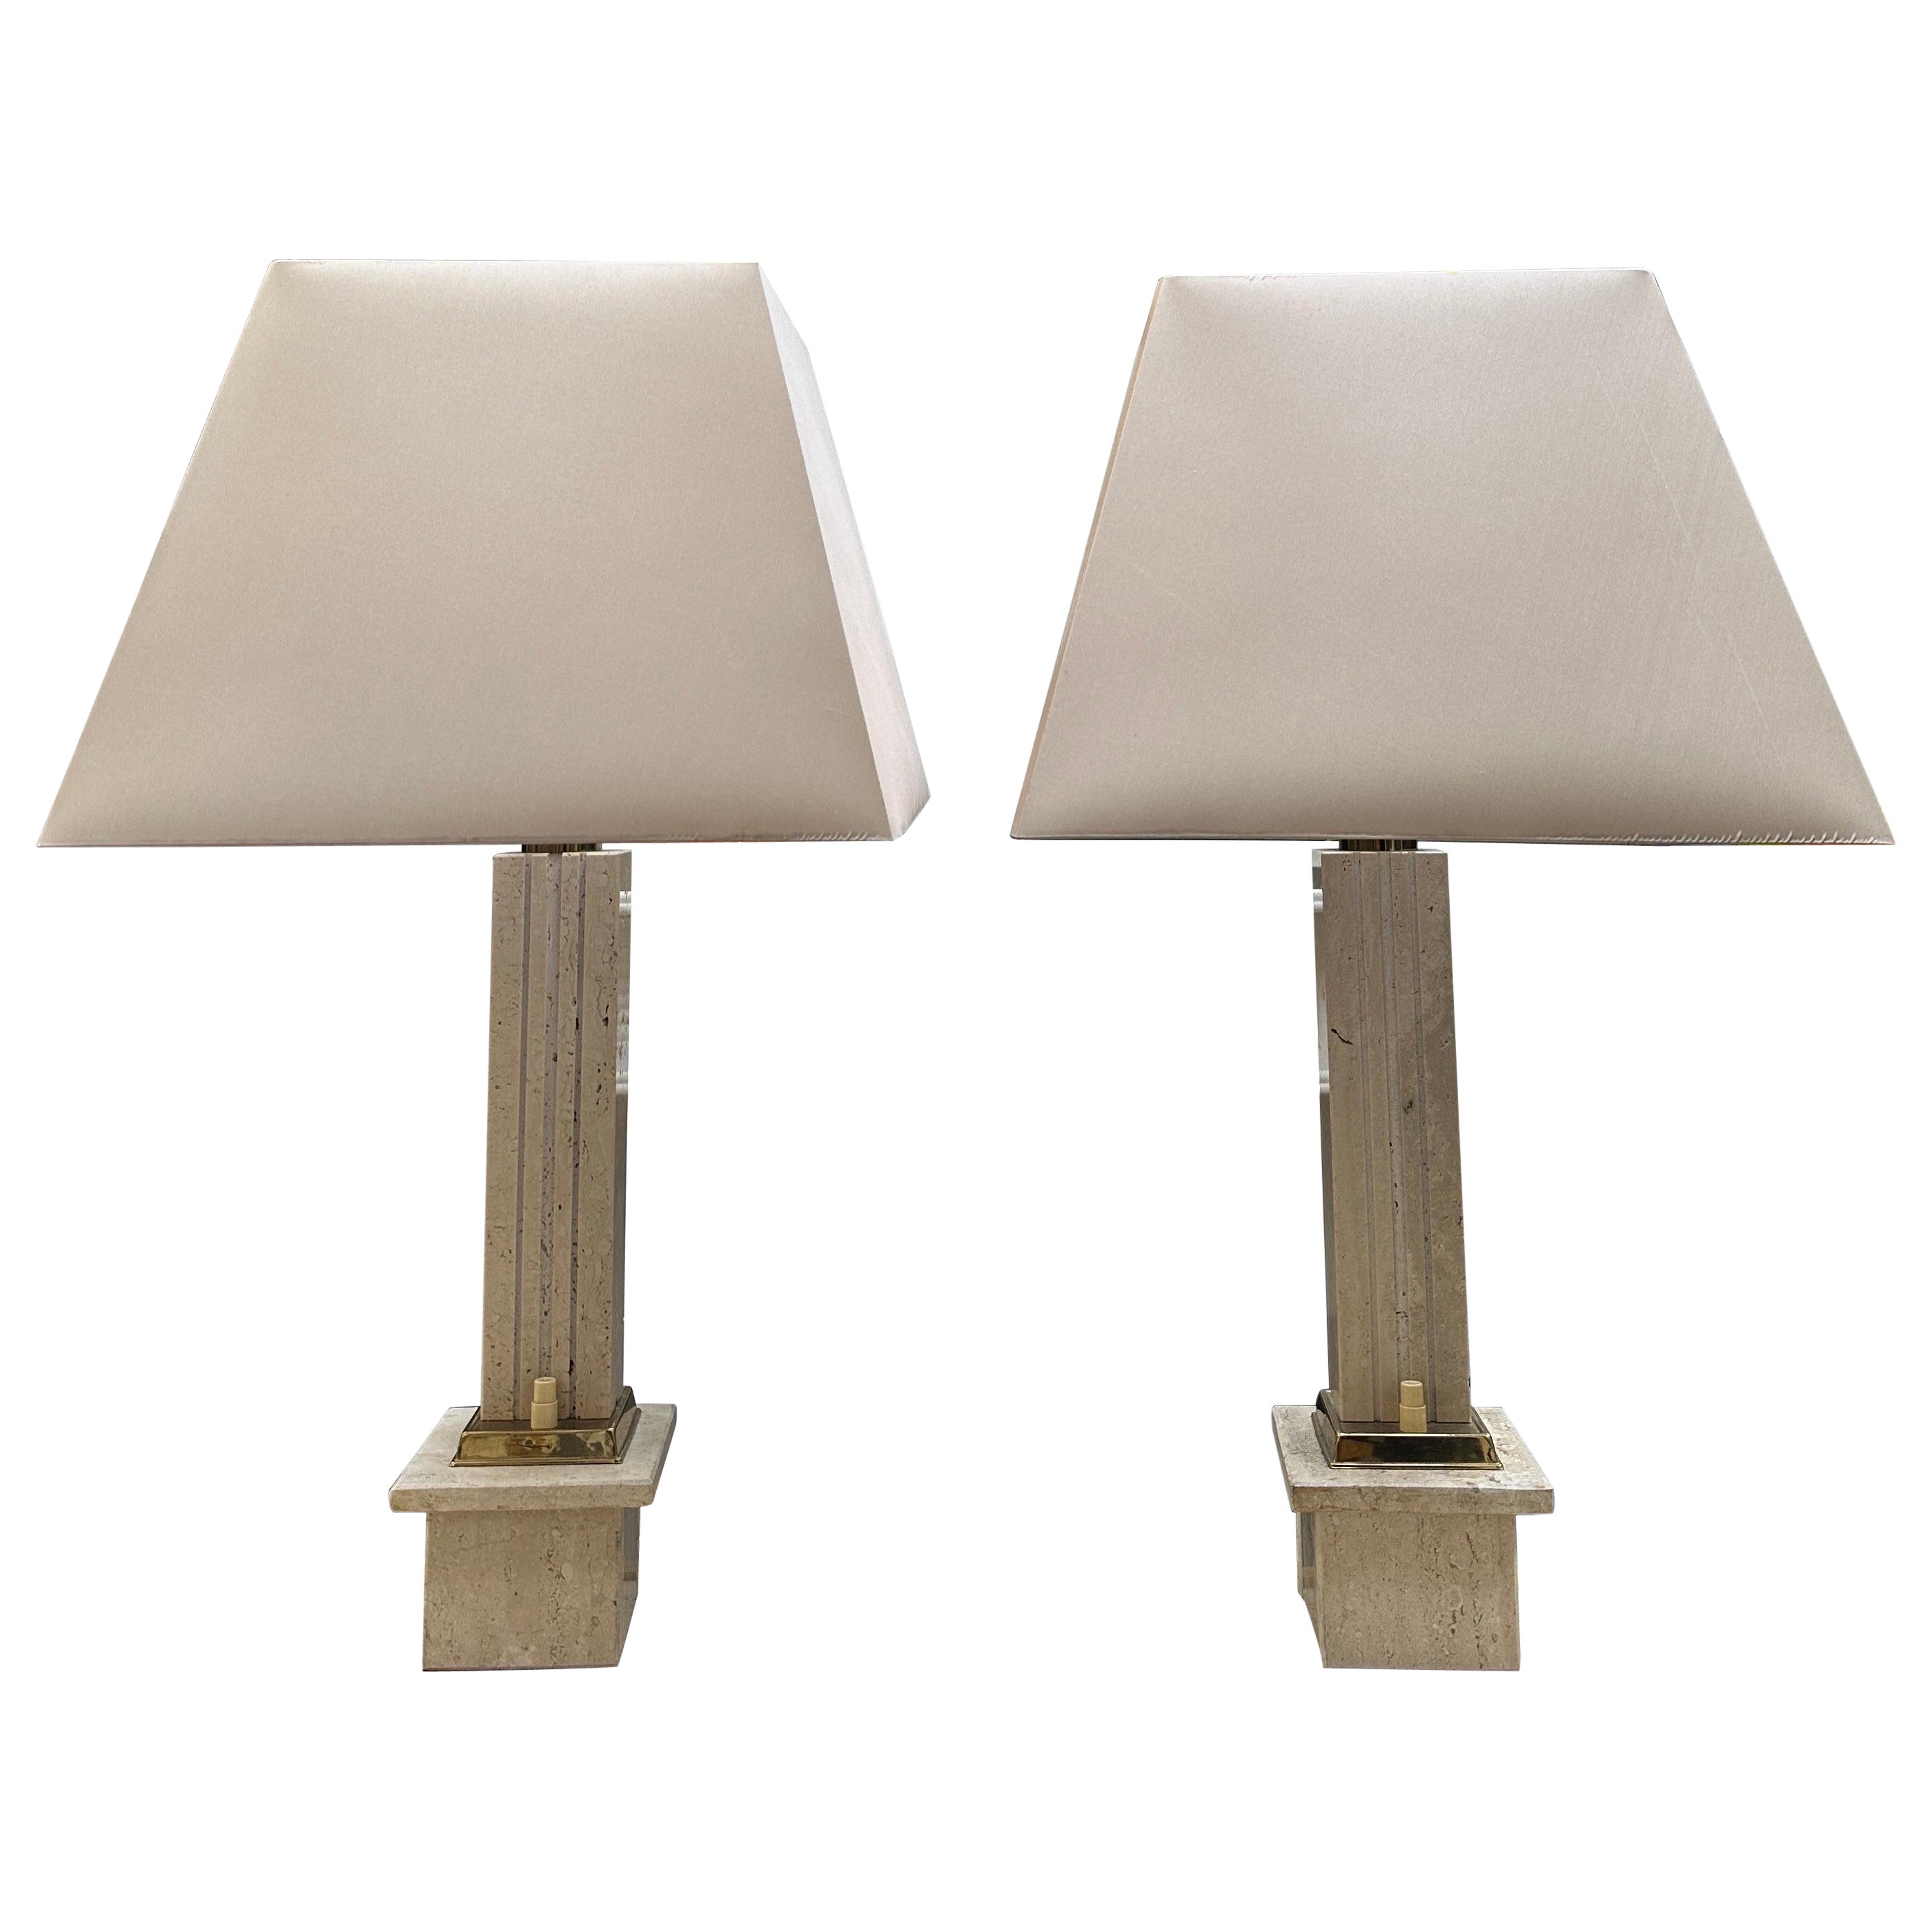 A Pair Of Tall Italian Travertine and Brass Table Lamps 